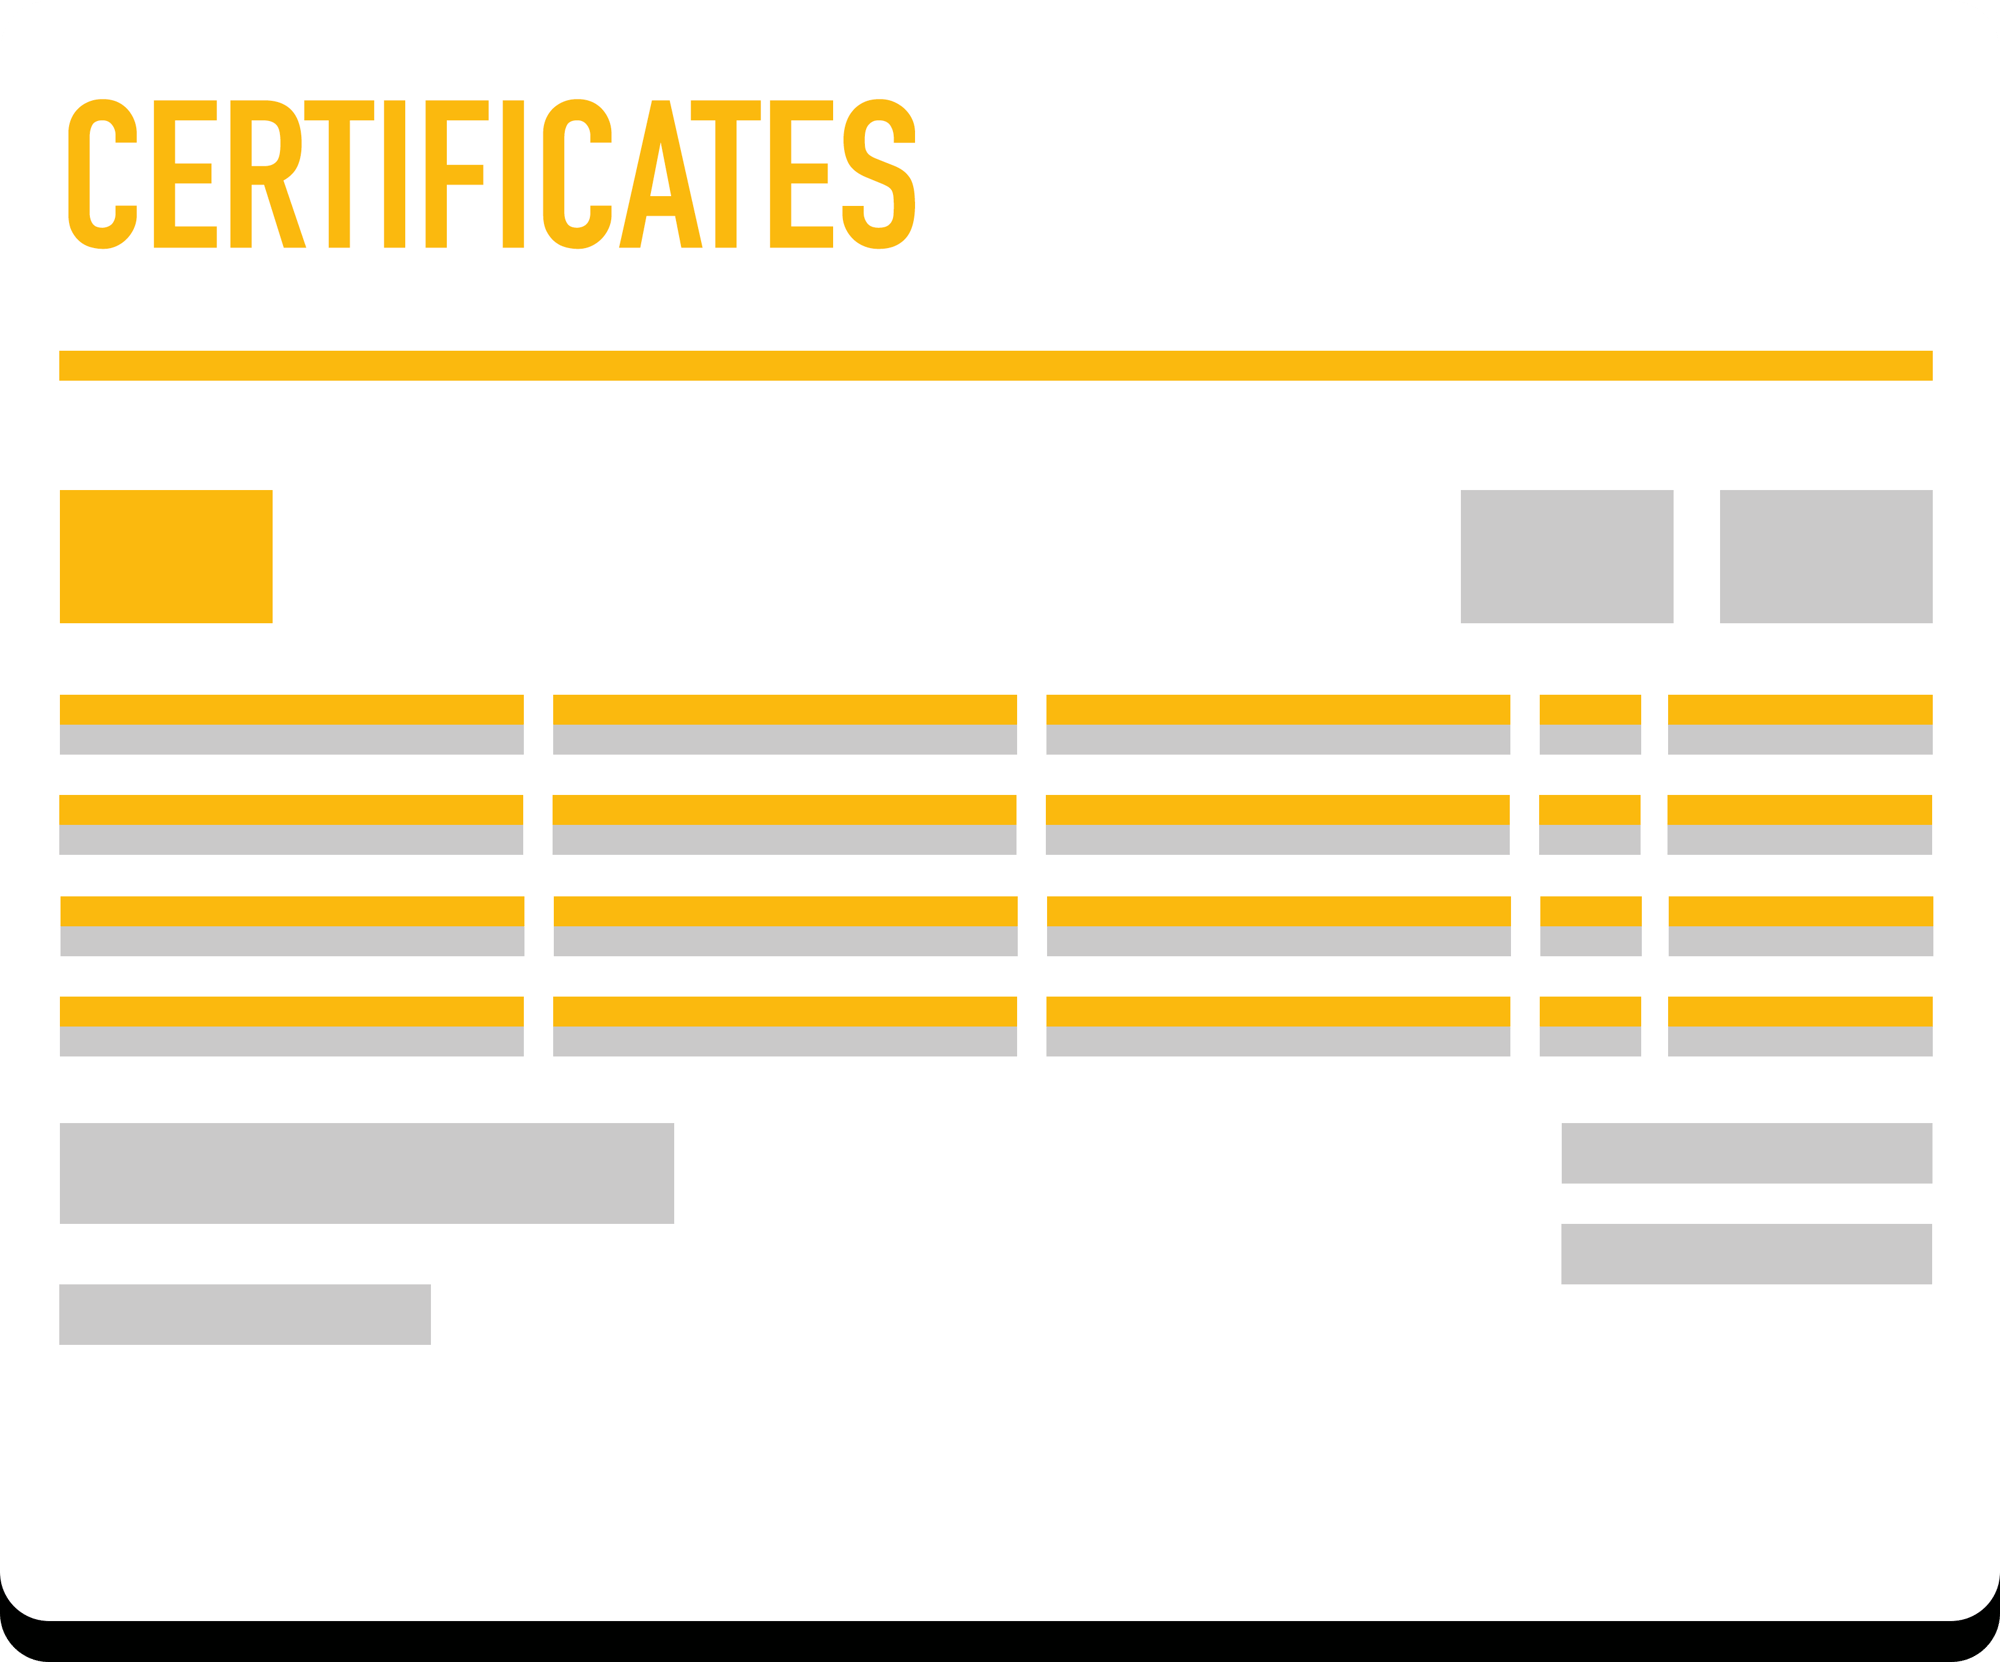 Certificates for the building trade